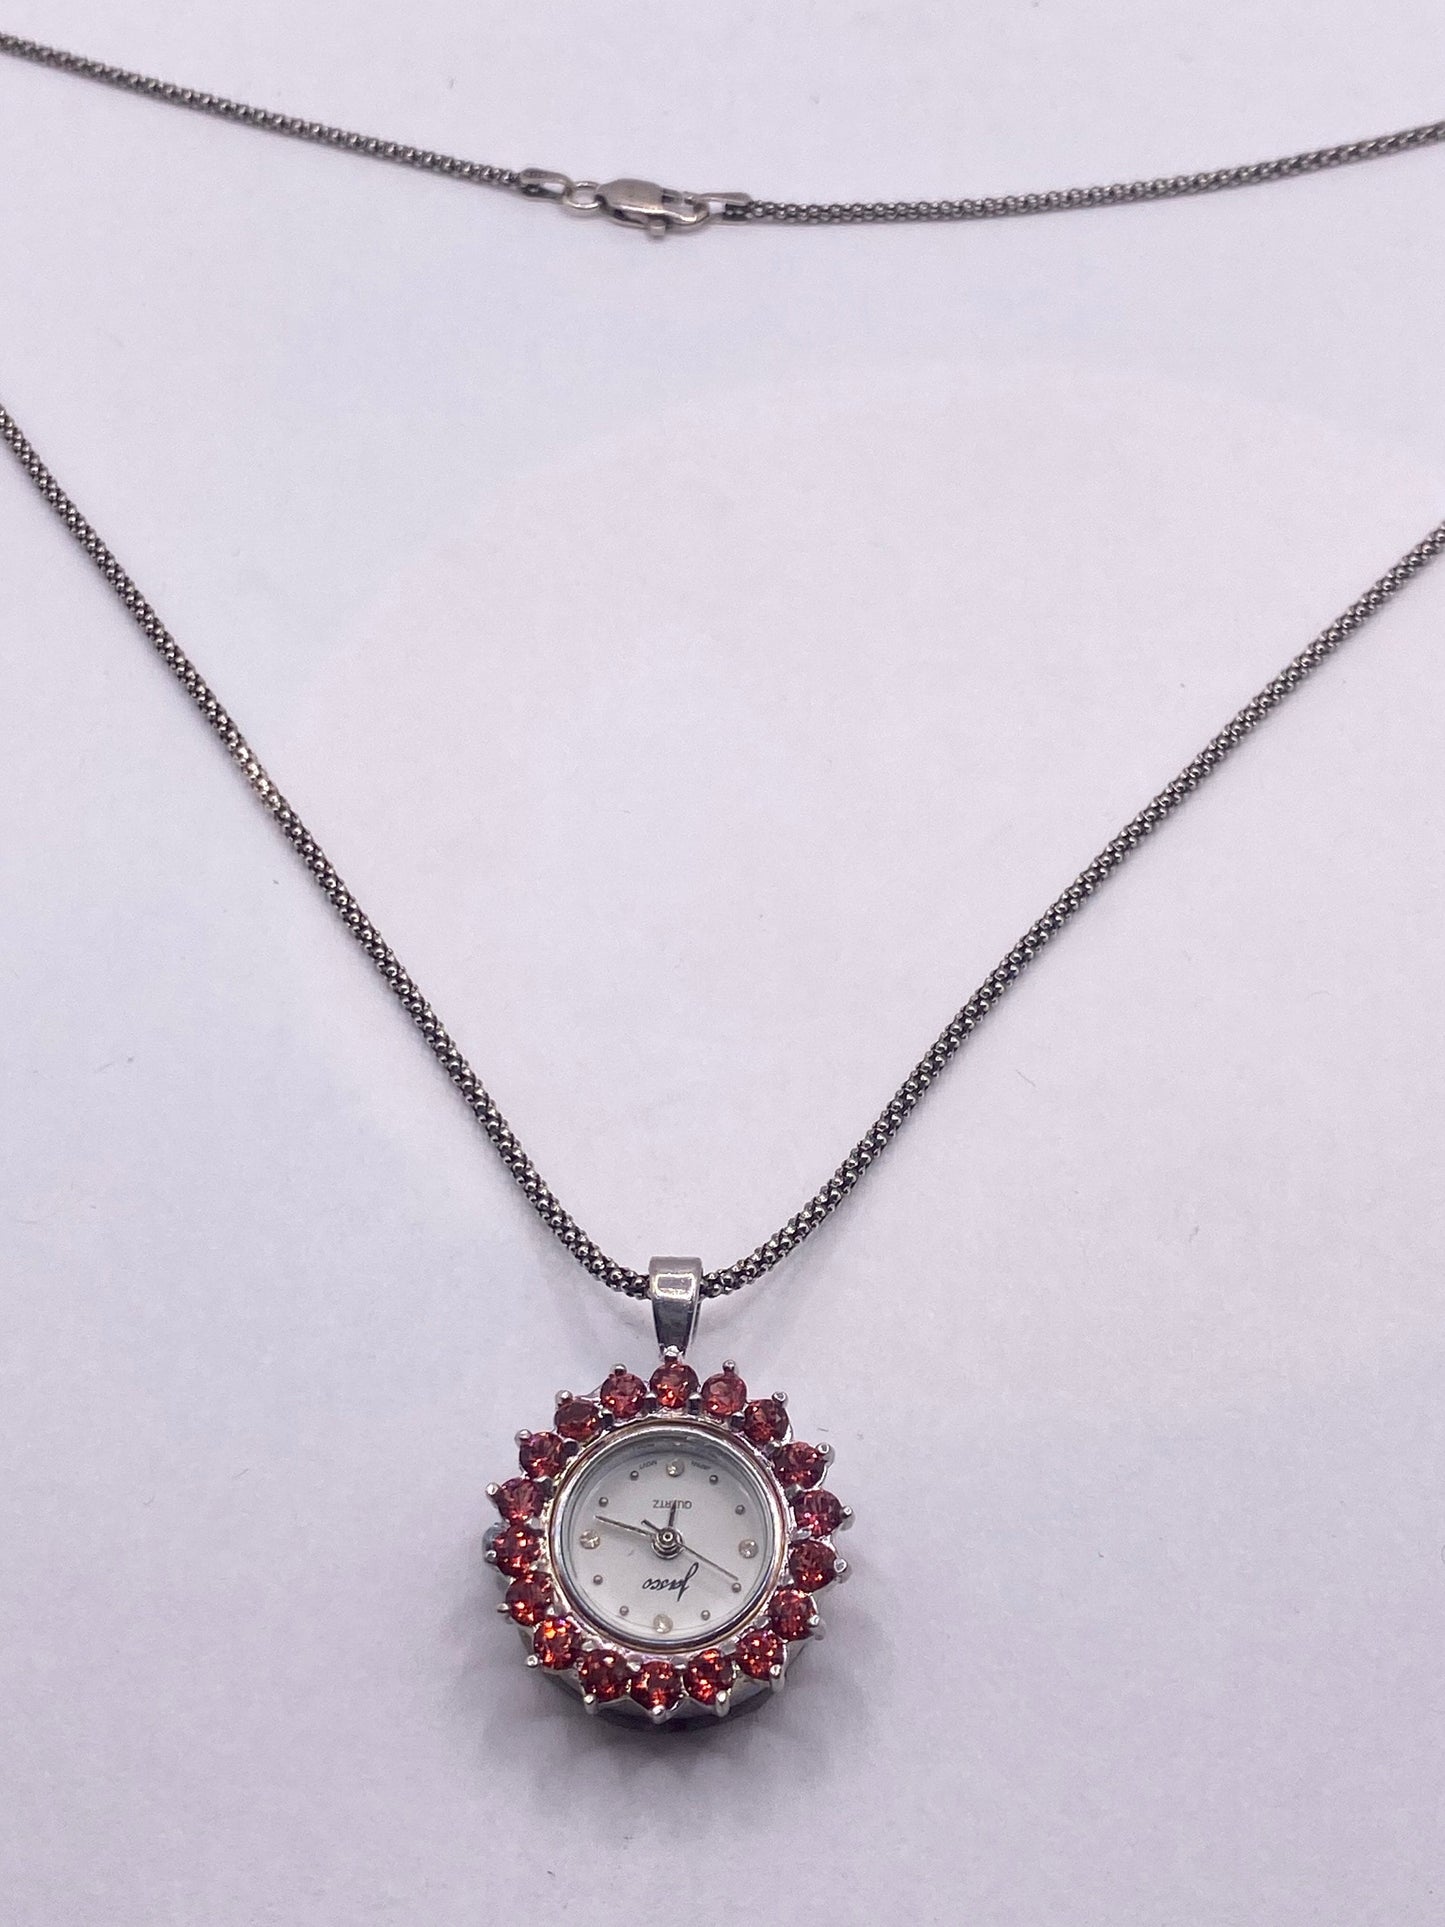 Vintage Watch Necklace 925 Sterling Silver Red CZ Antique Pendant